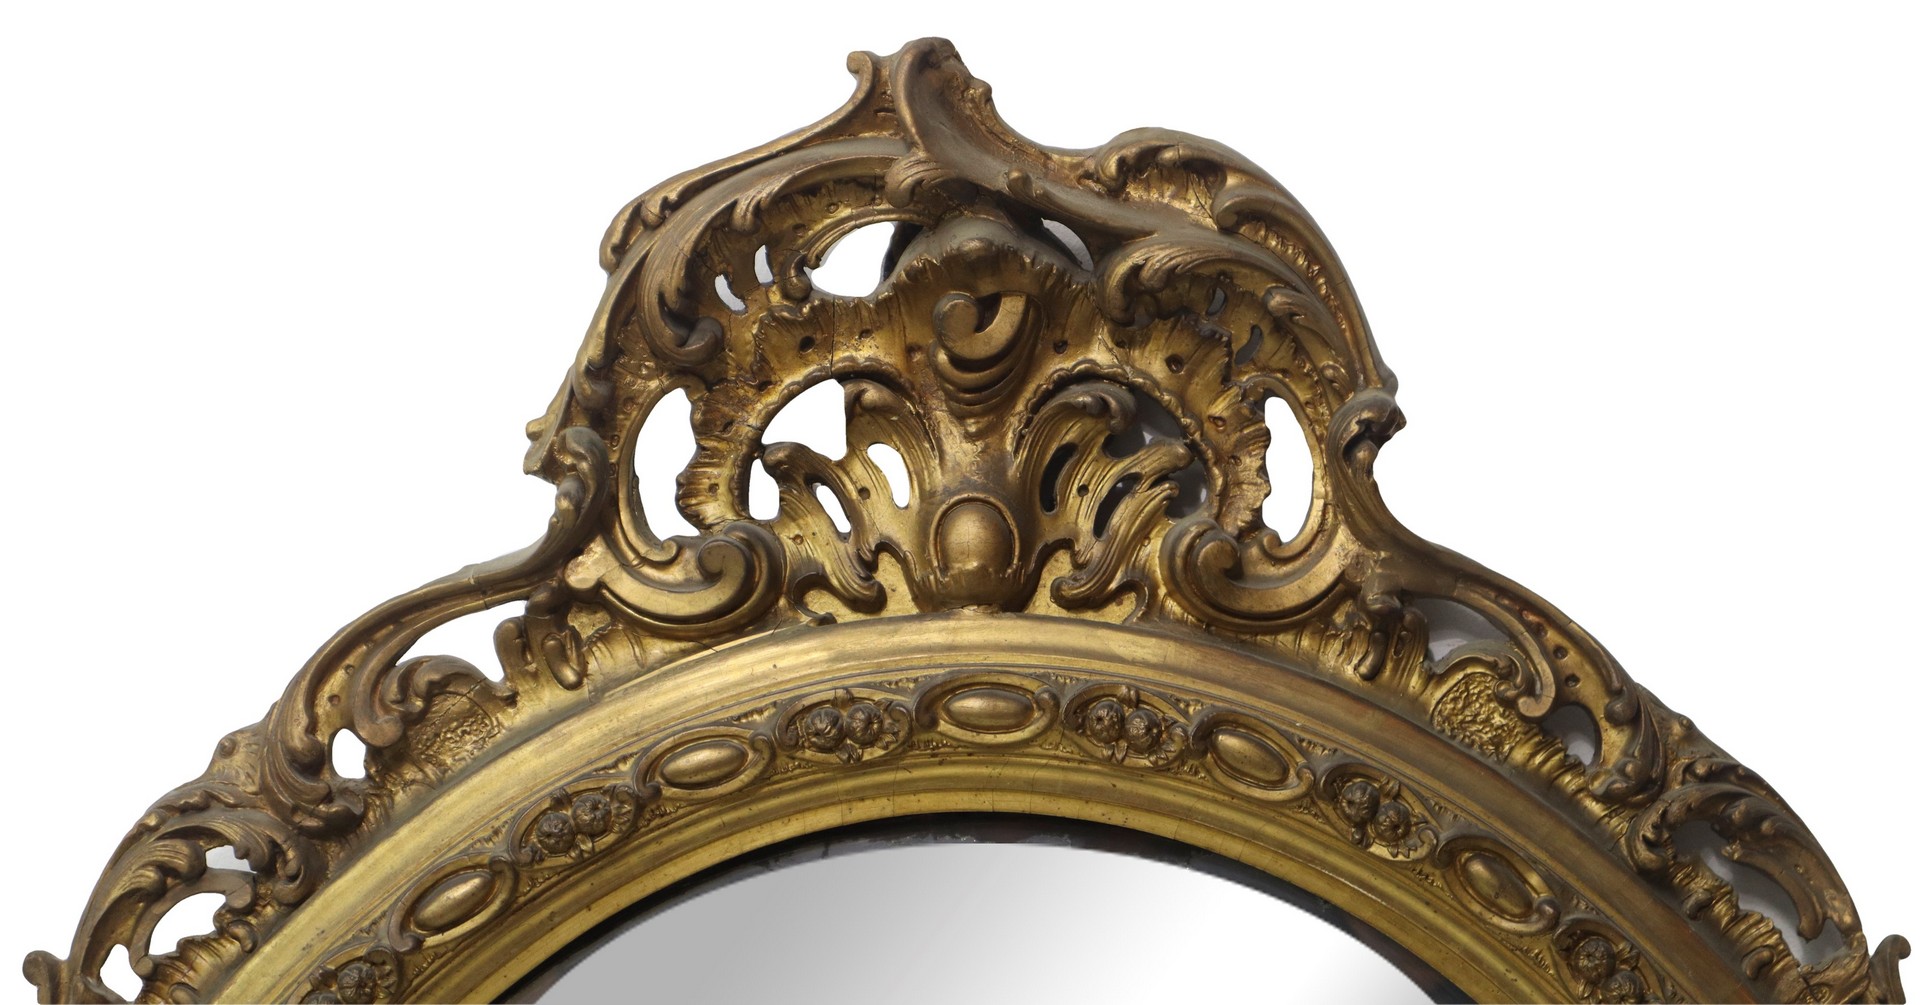 Oval mirror in gilded wood, Late 19th century - Image 2 of 6